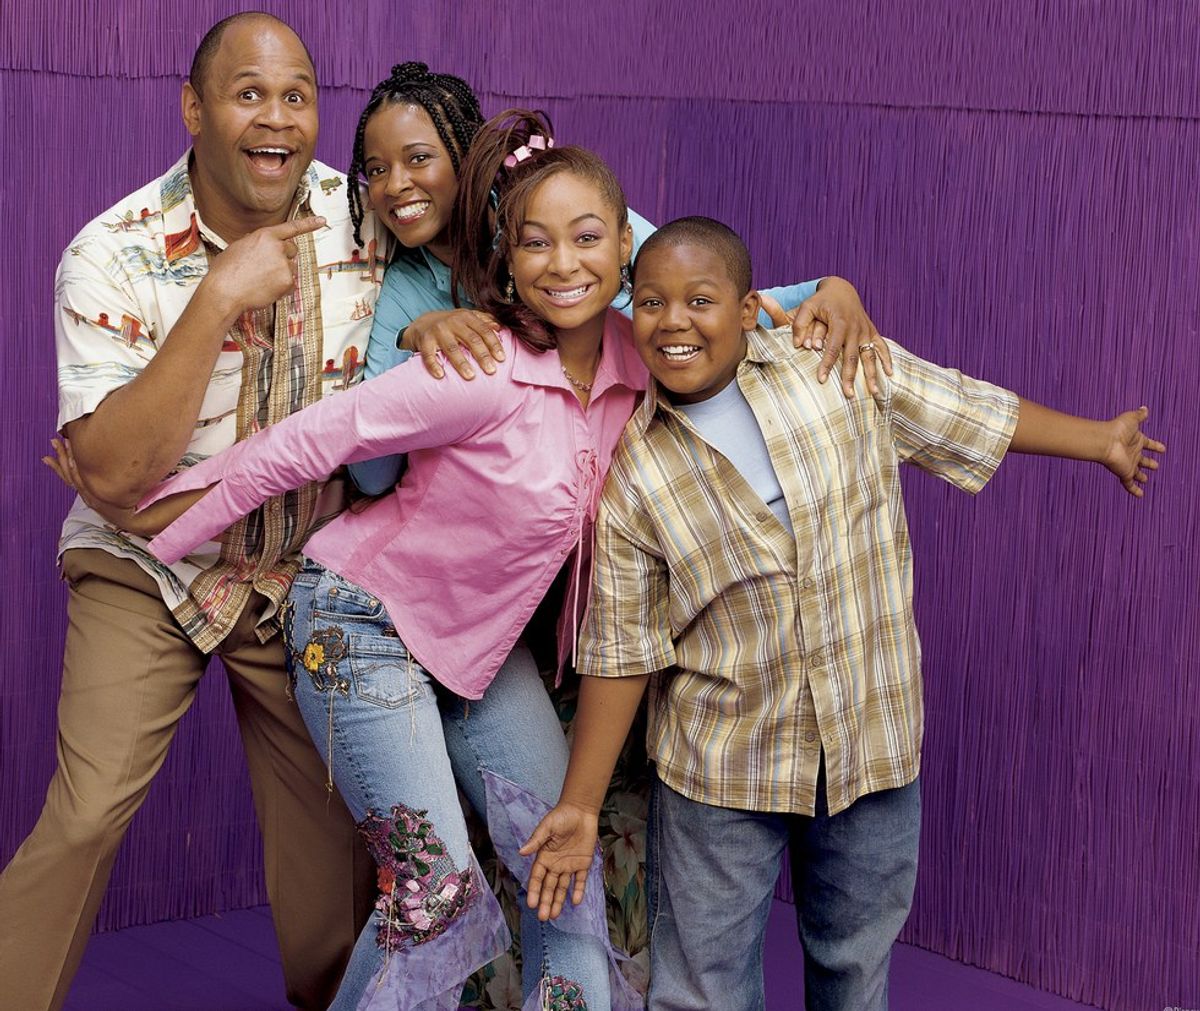 That's So Raven is Returning To The Disney Channel